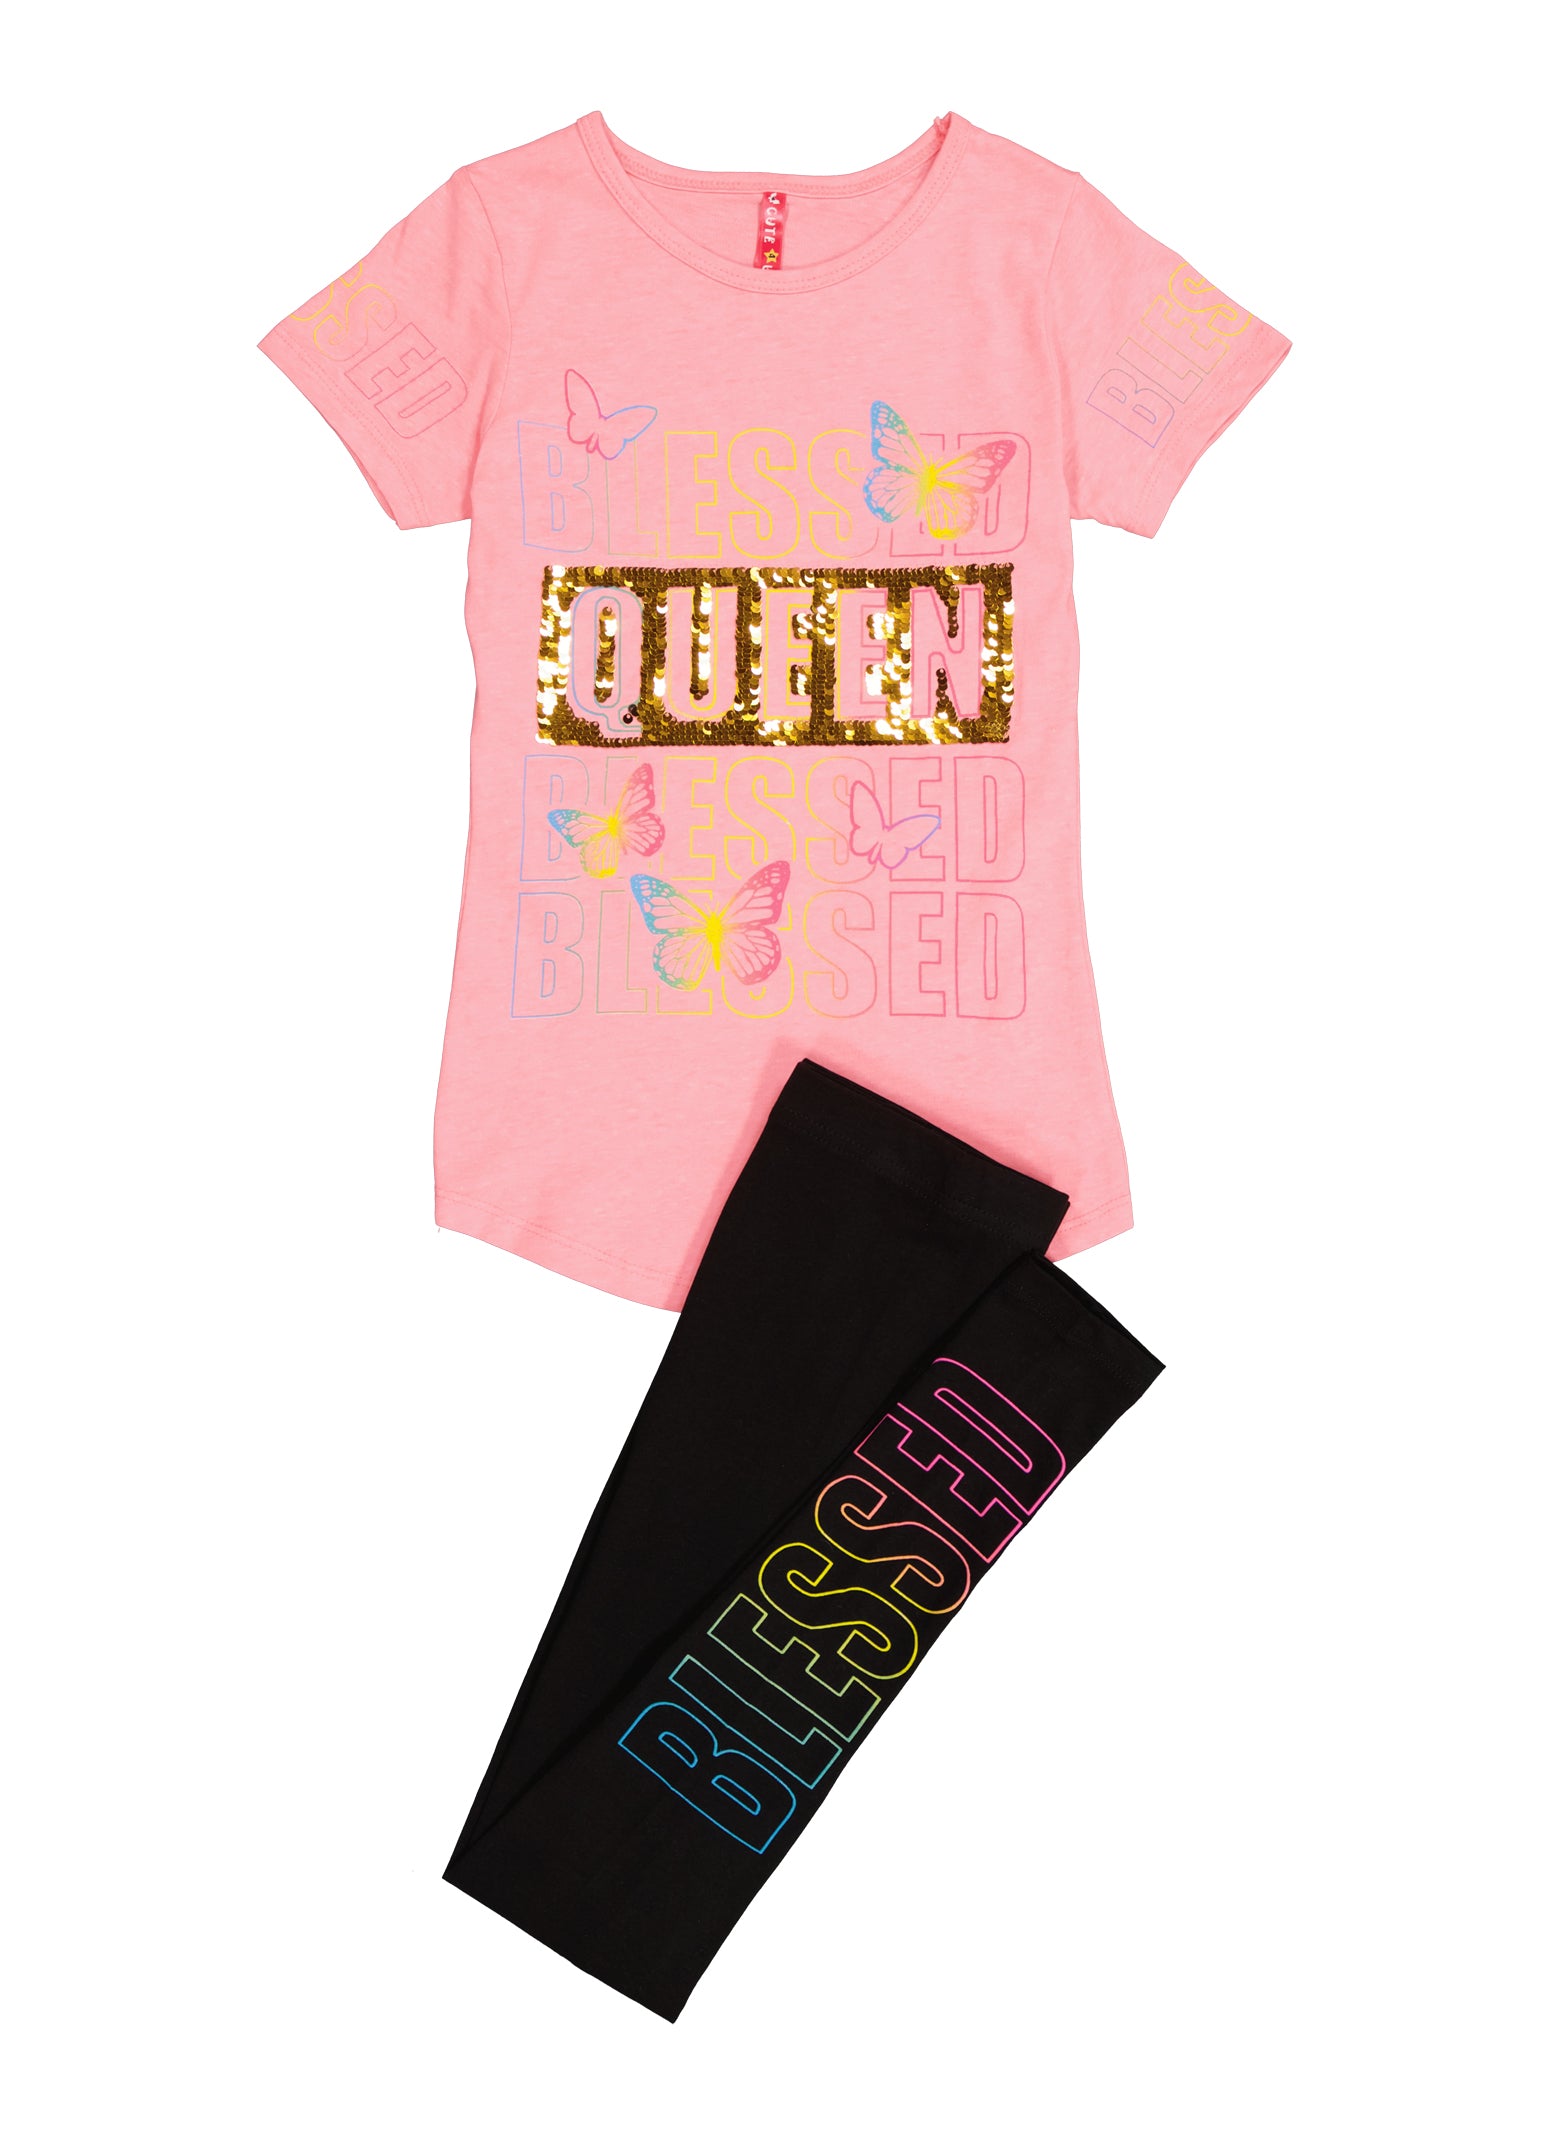 Rainbow Shops Girls Reversible Good Vibes Only Graphic Tee and Leggings,  Yellow, Size 14-16